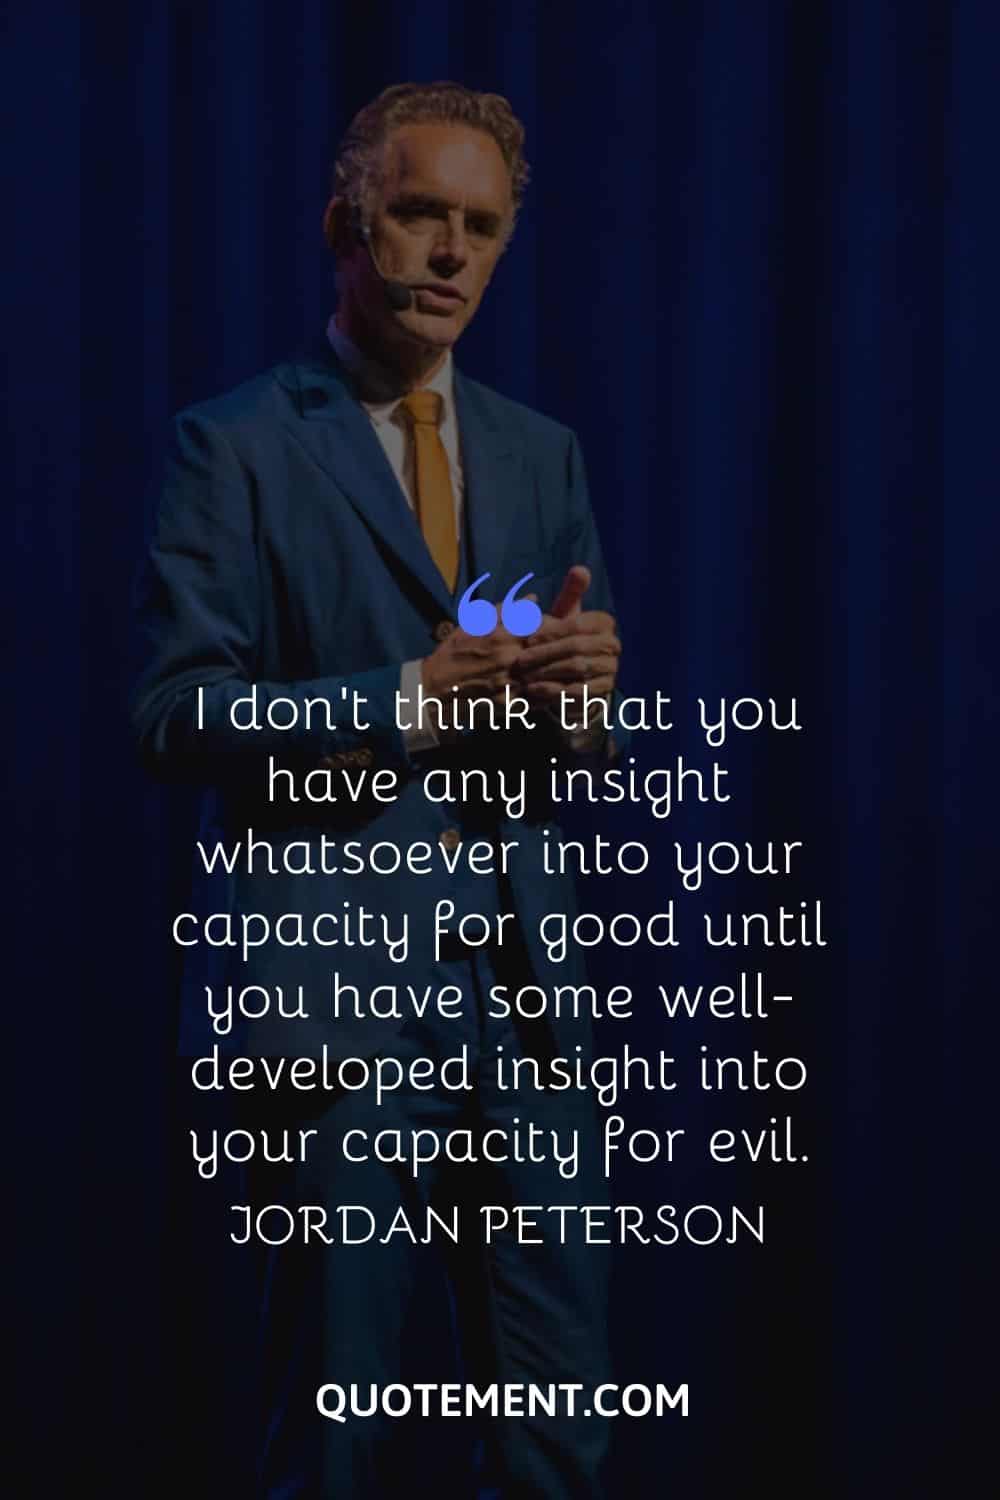 “I don't think that you have any insight whatsoever into your capacity for good until you have some well-developed insight into your capacity for evil.” — Jordan Peterso